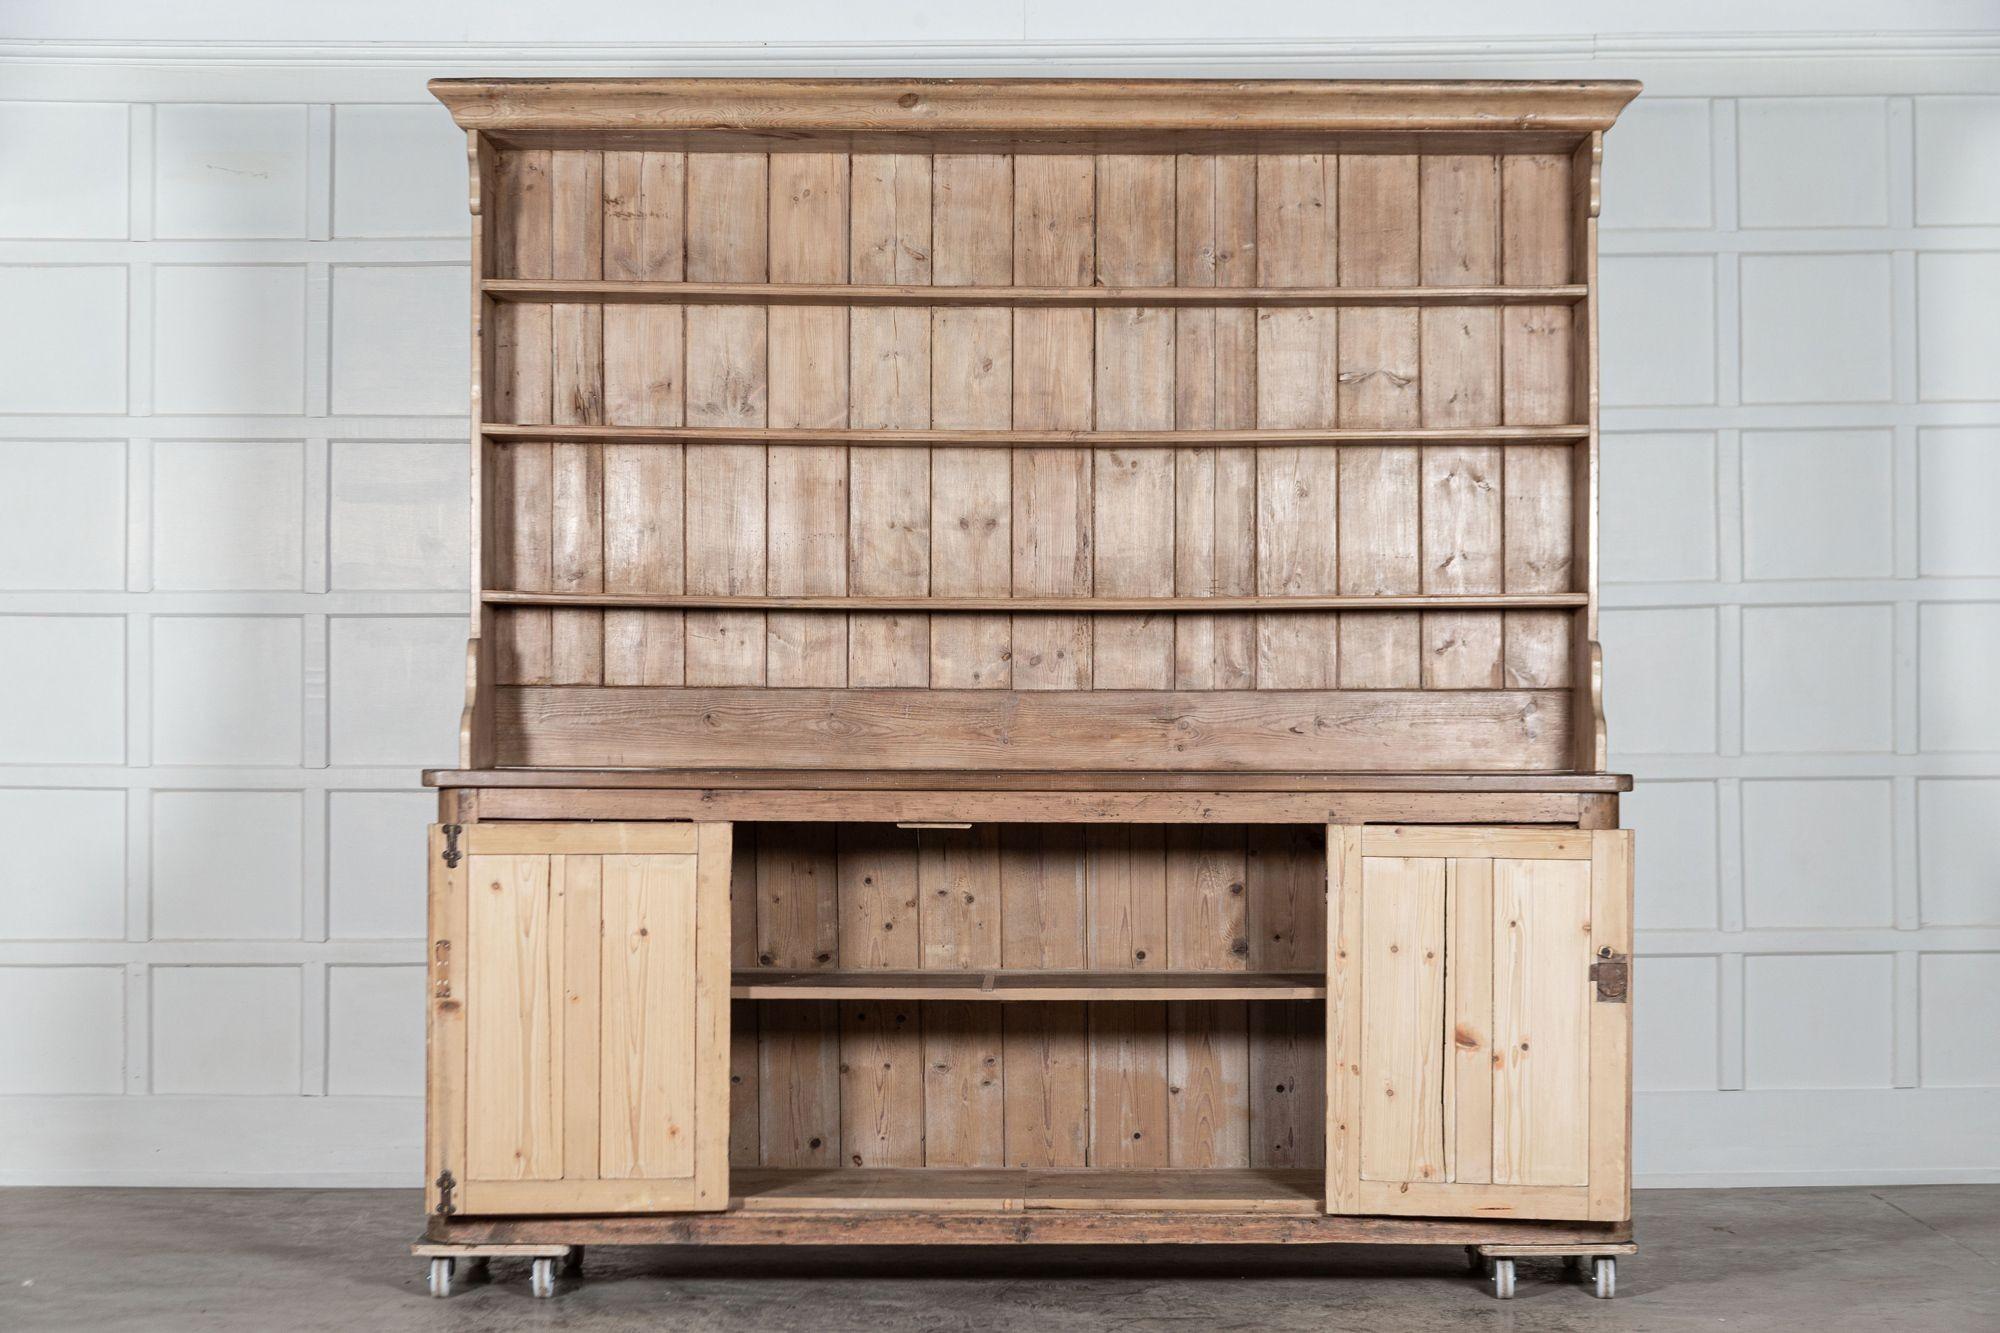 circa 1890
Large 19th century English pine dresser
sku 1391
 
We can also customise existing pieces to suit your scheme/requirements. We have our own workshop, restorers and finishers. From adapting to finishing pieces including, stripping,